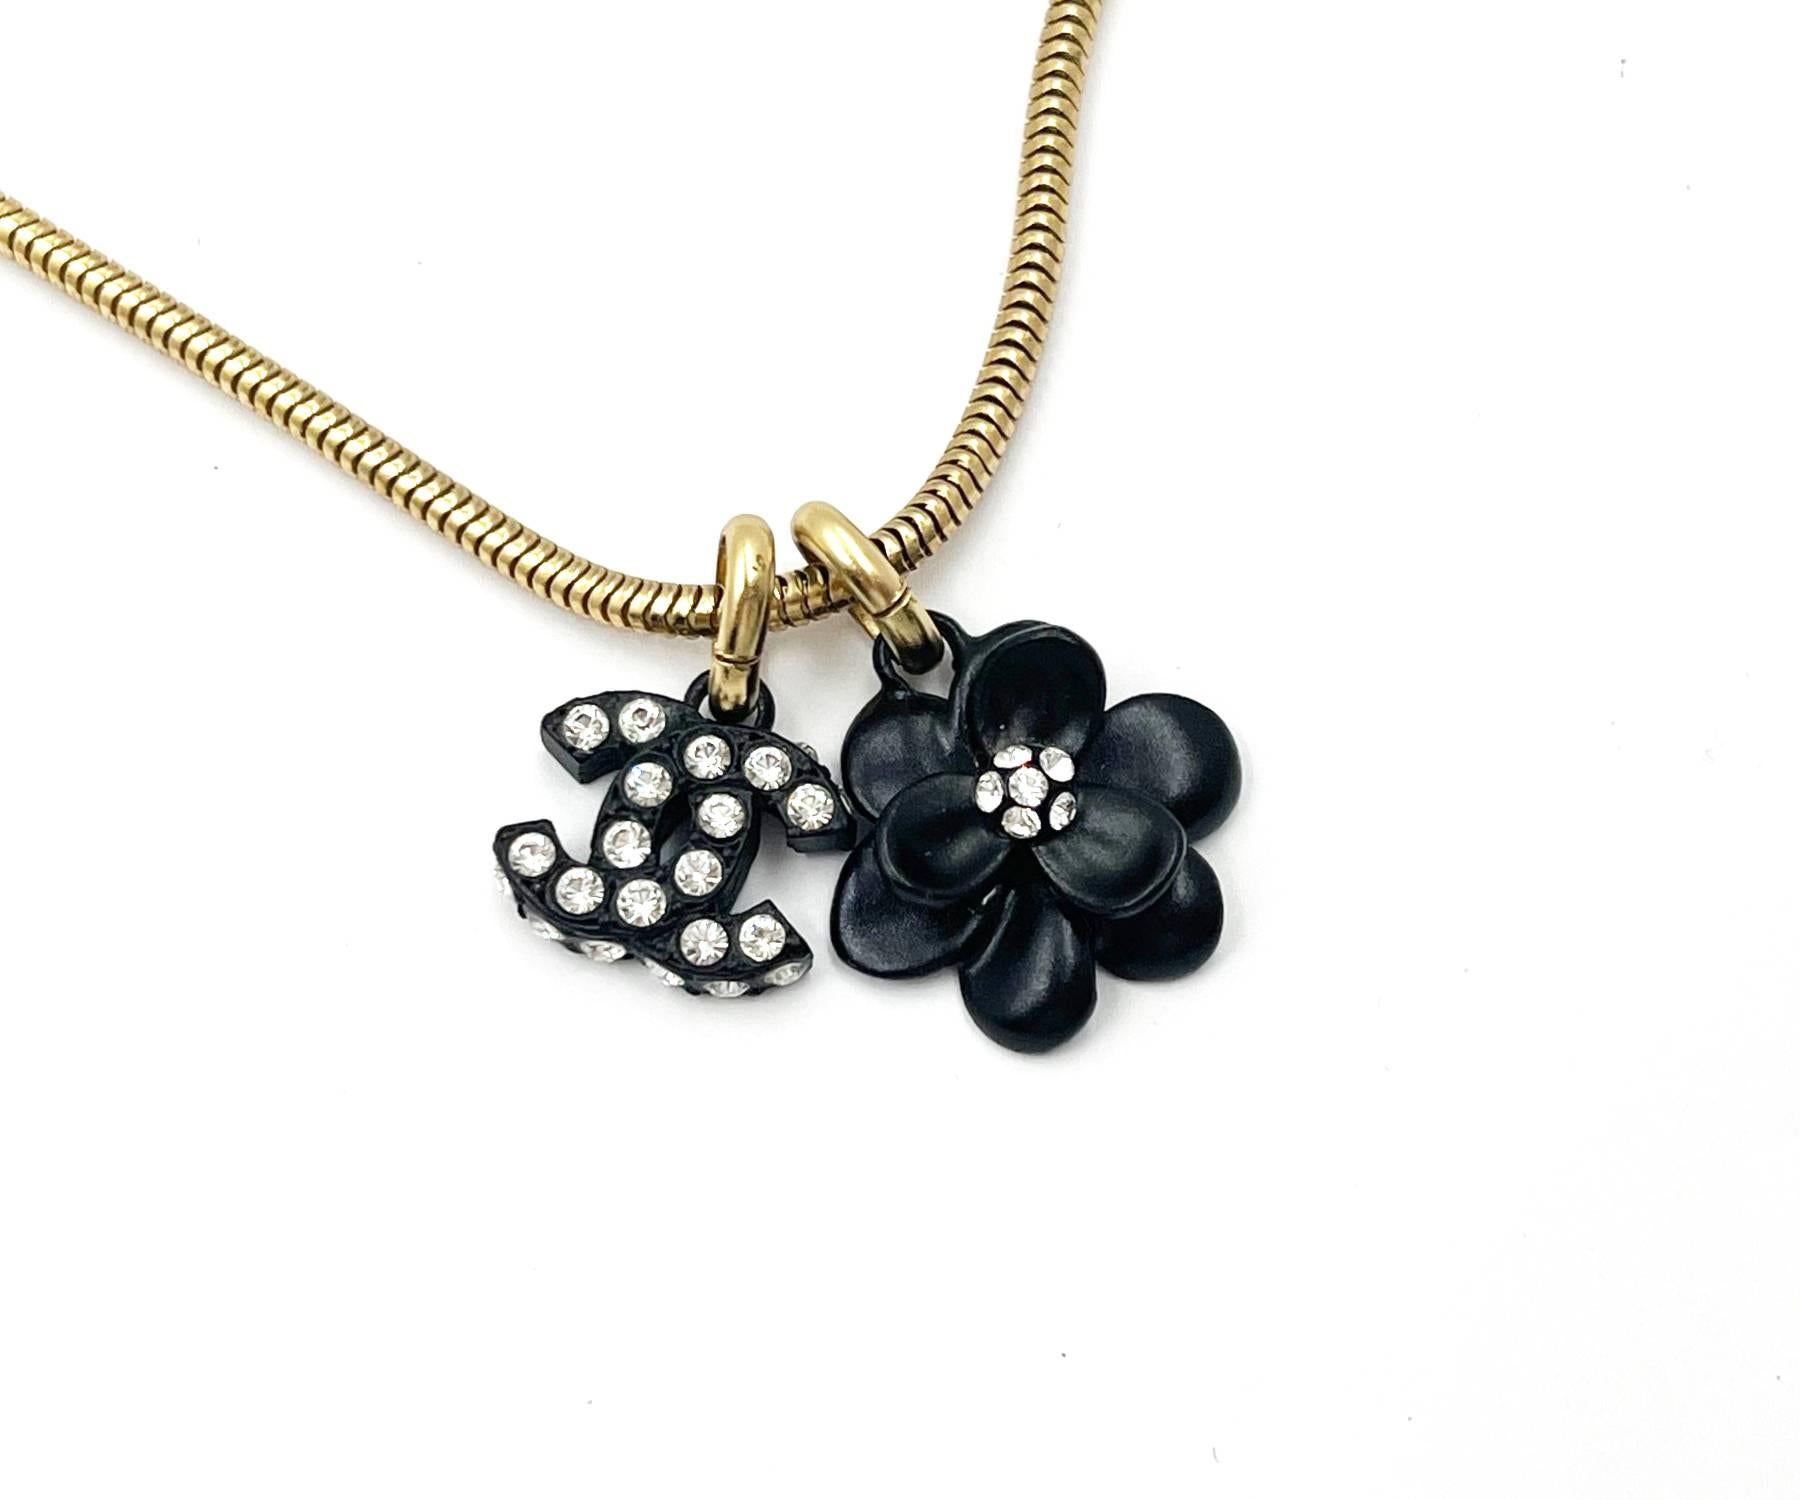 Chanel Vintage Rare Gold Plated Black CC Flower Crystal Chain Necklace

*Marked 02
*Made in France

-The pendant is approximately 0.75″ x 0.75″.
-The necklace is approximately 18″.
-In a pristine condition

AB2082-00498